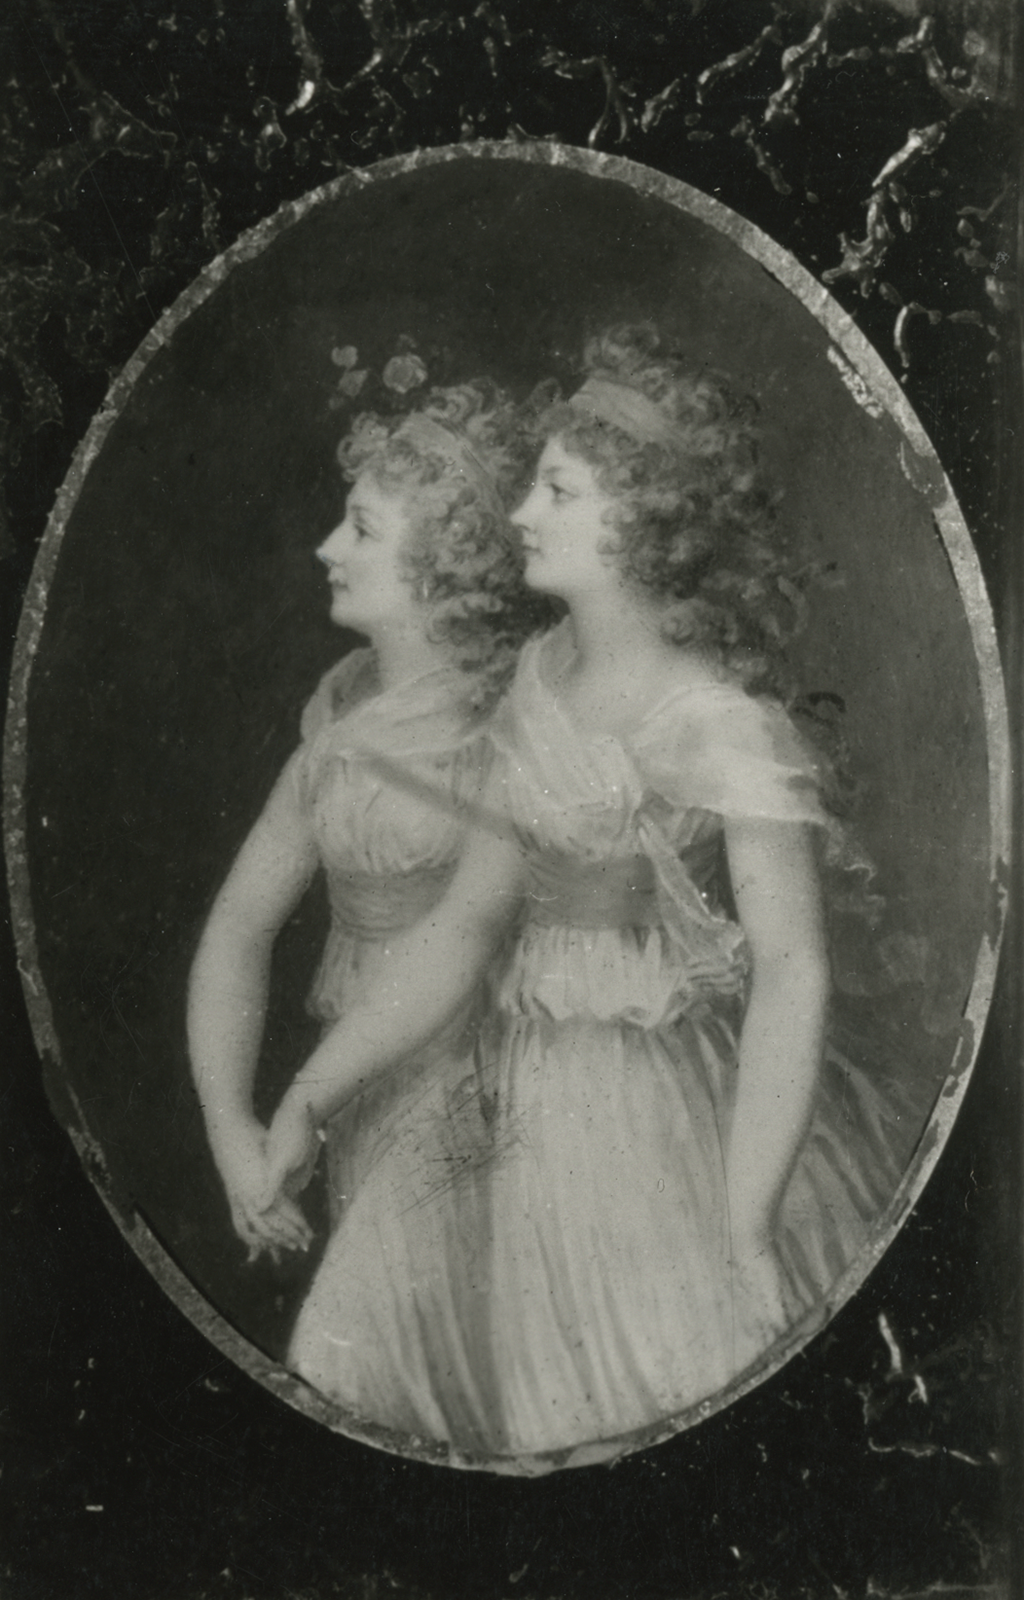 A black and white reproduciton of a drawing of two women walking and holding each other's hands. They both face to the viewer's left and have long, curly hair tied up with ribbons.